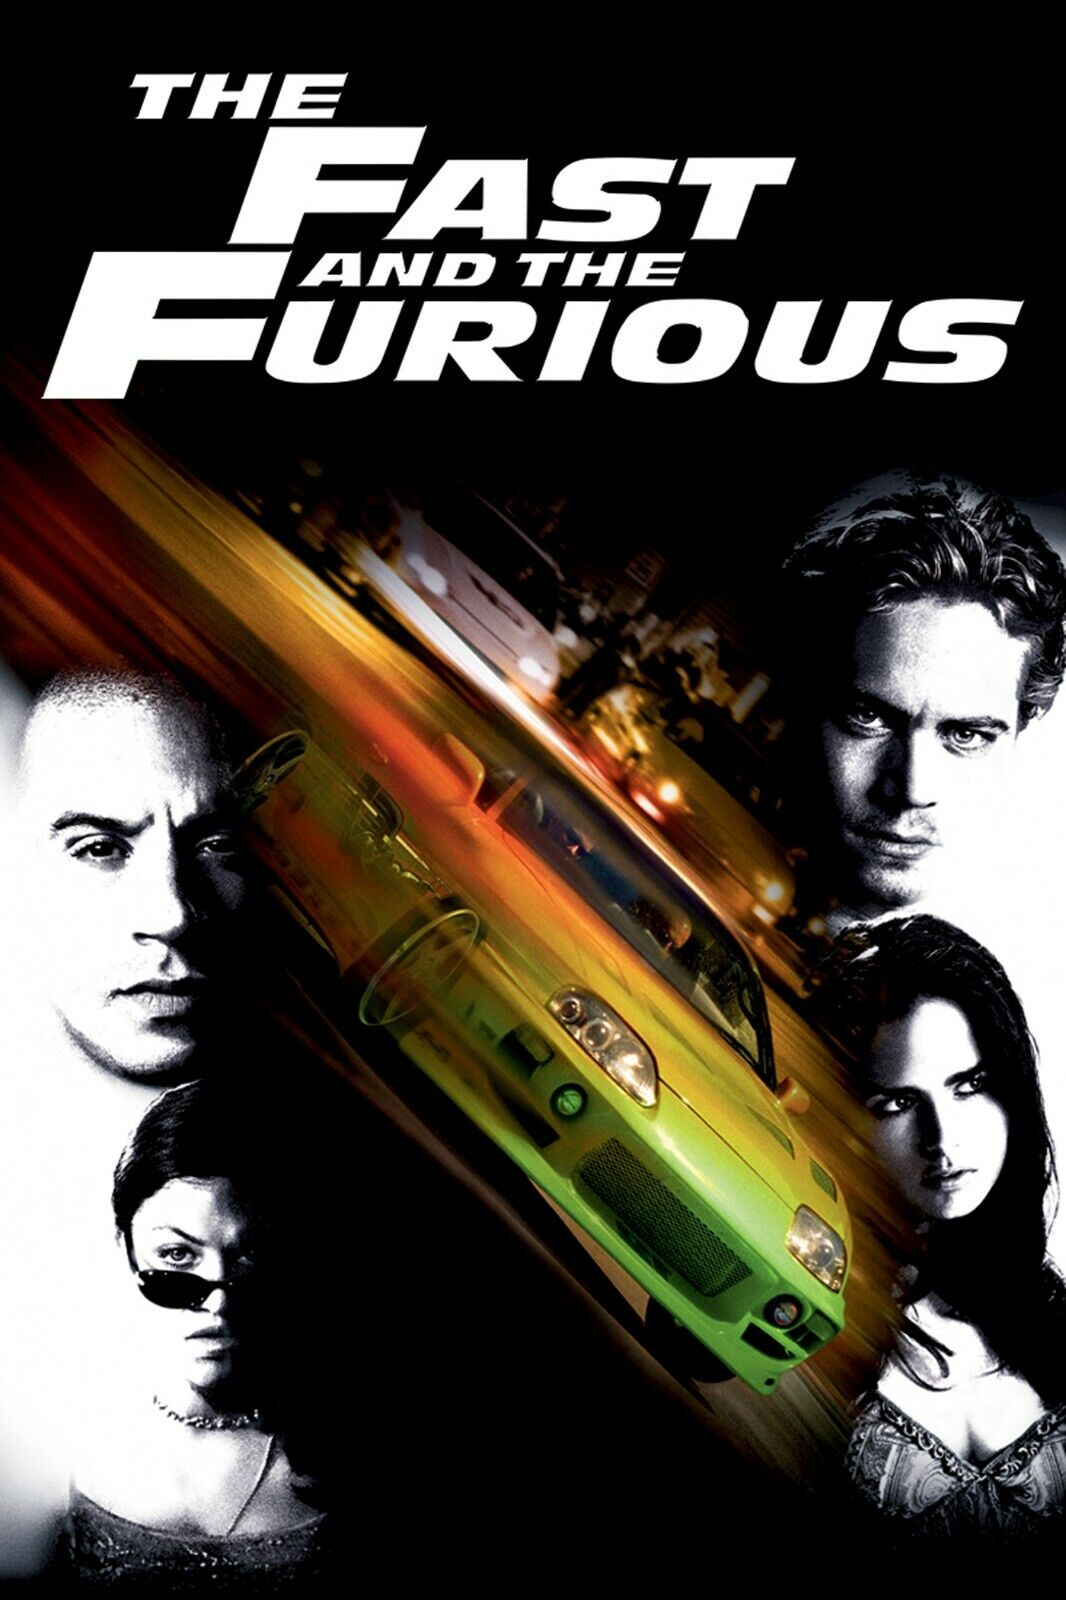 The Fast and Furious movie poster